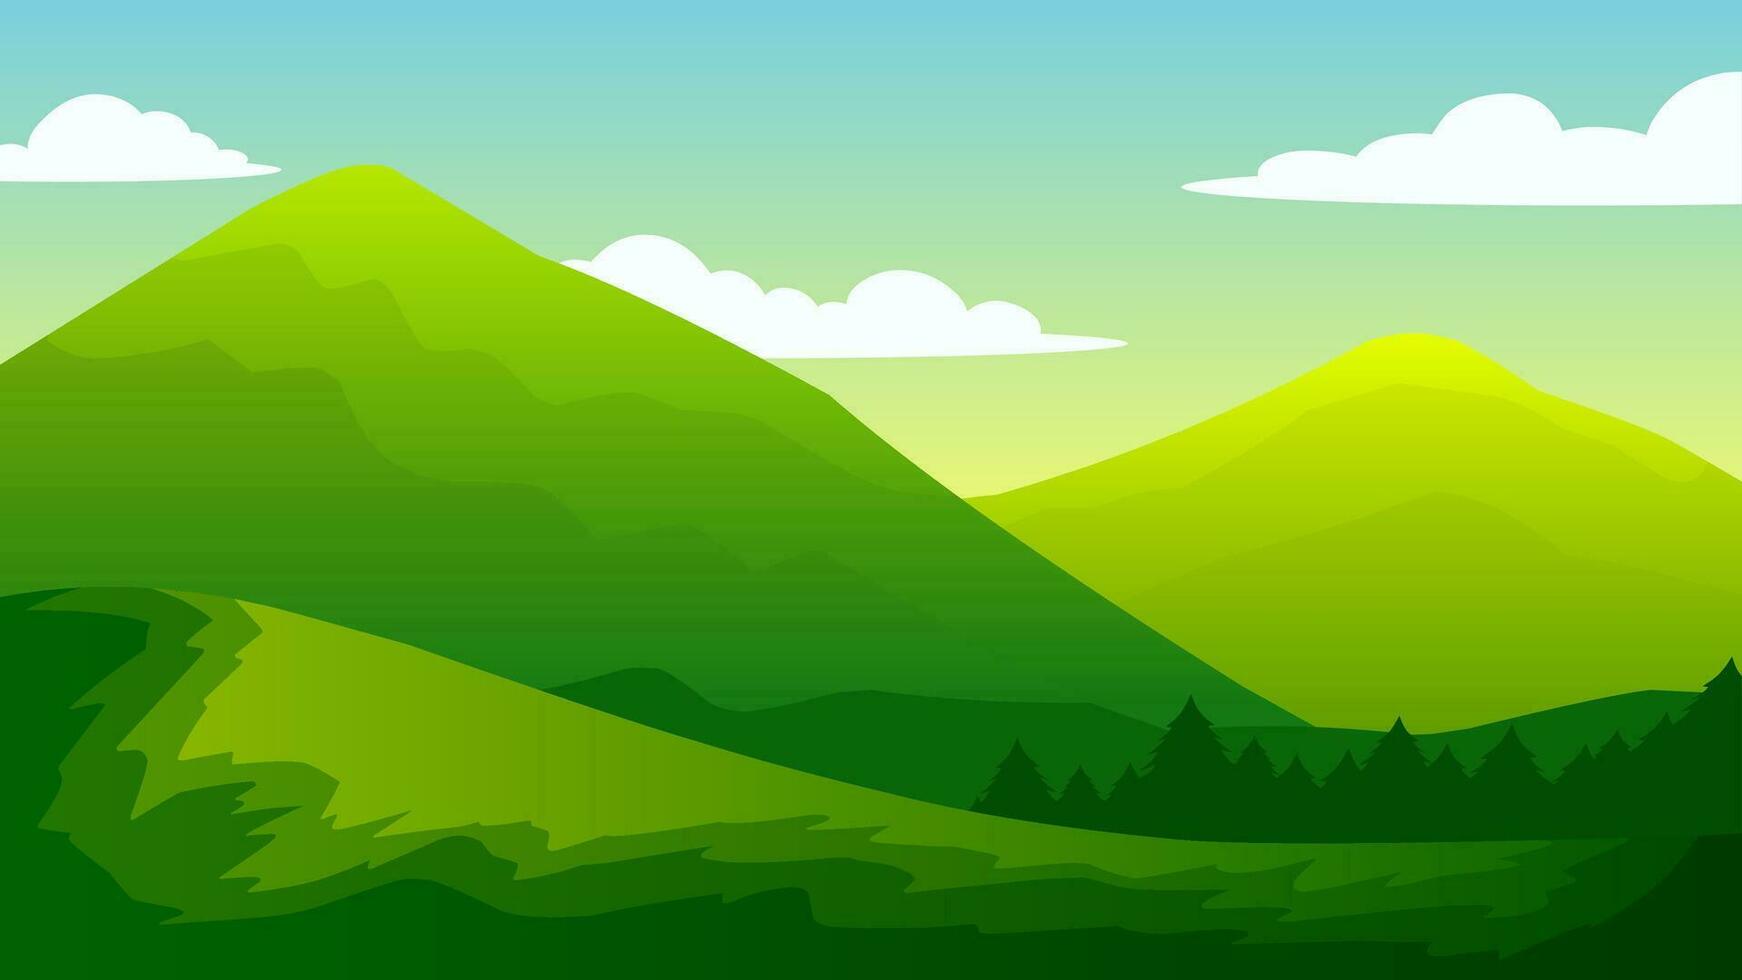 Meadow on green mountain vector illustration. Green hills landscape for background, wallpaper, or landing page. Landscape nature illustration with color gradient style